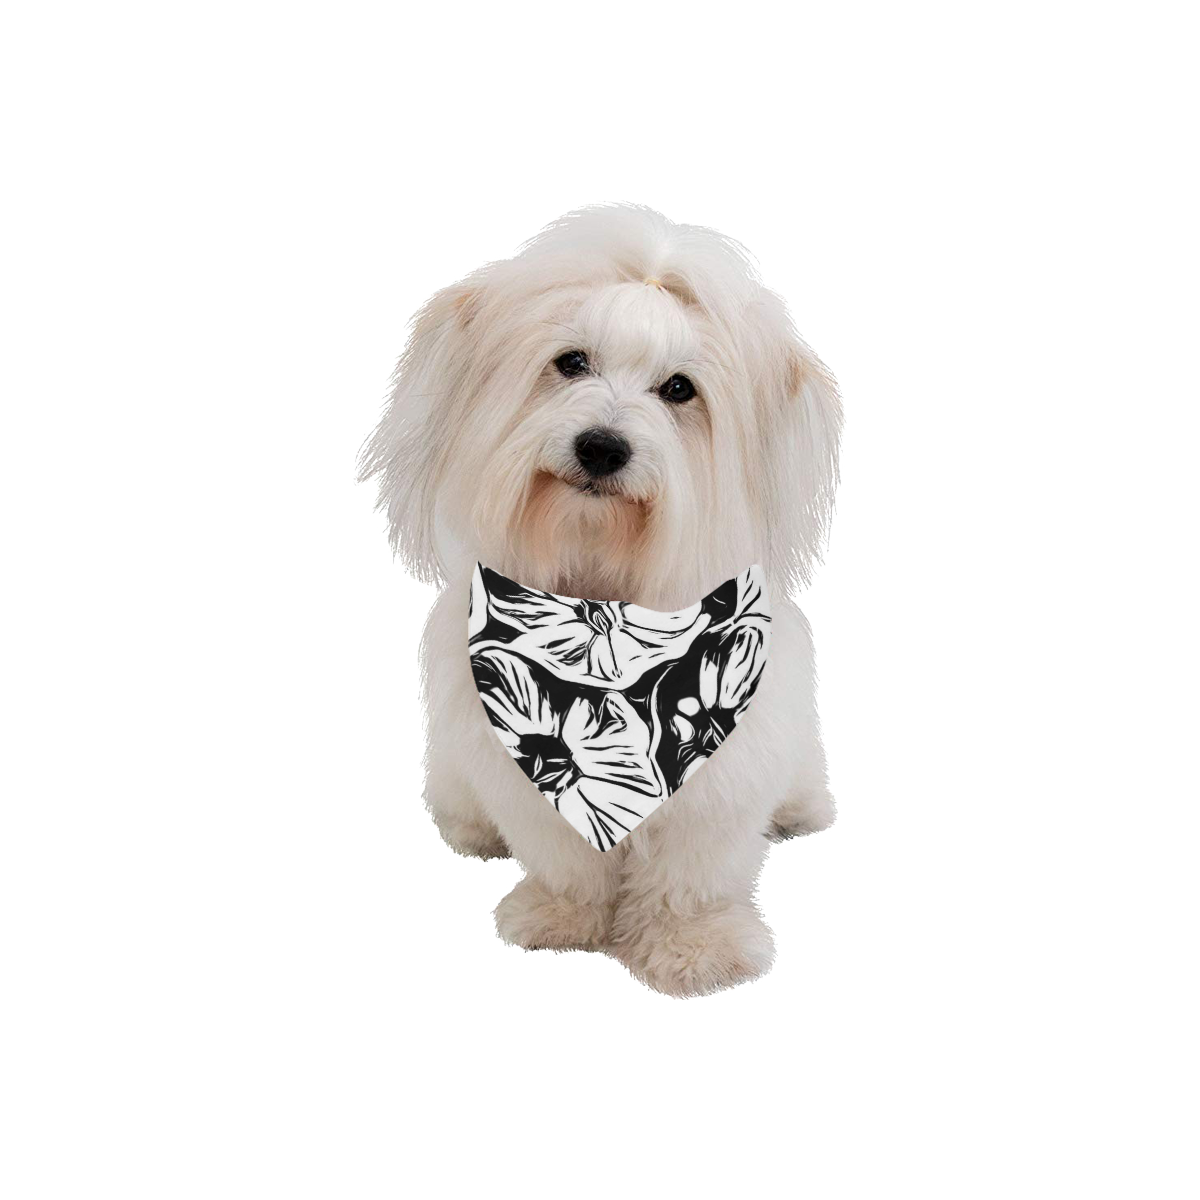 Inky Black and White Floral 3 by JamColors Pet Dog Bandana/Large Size